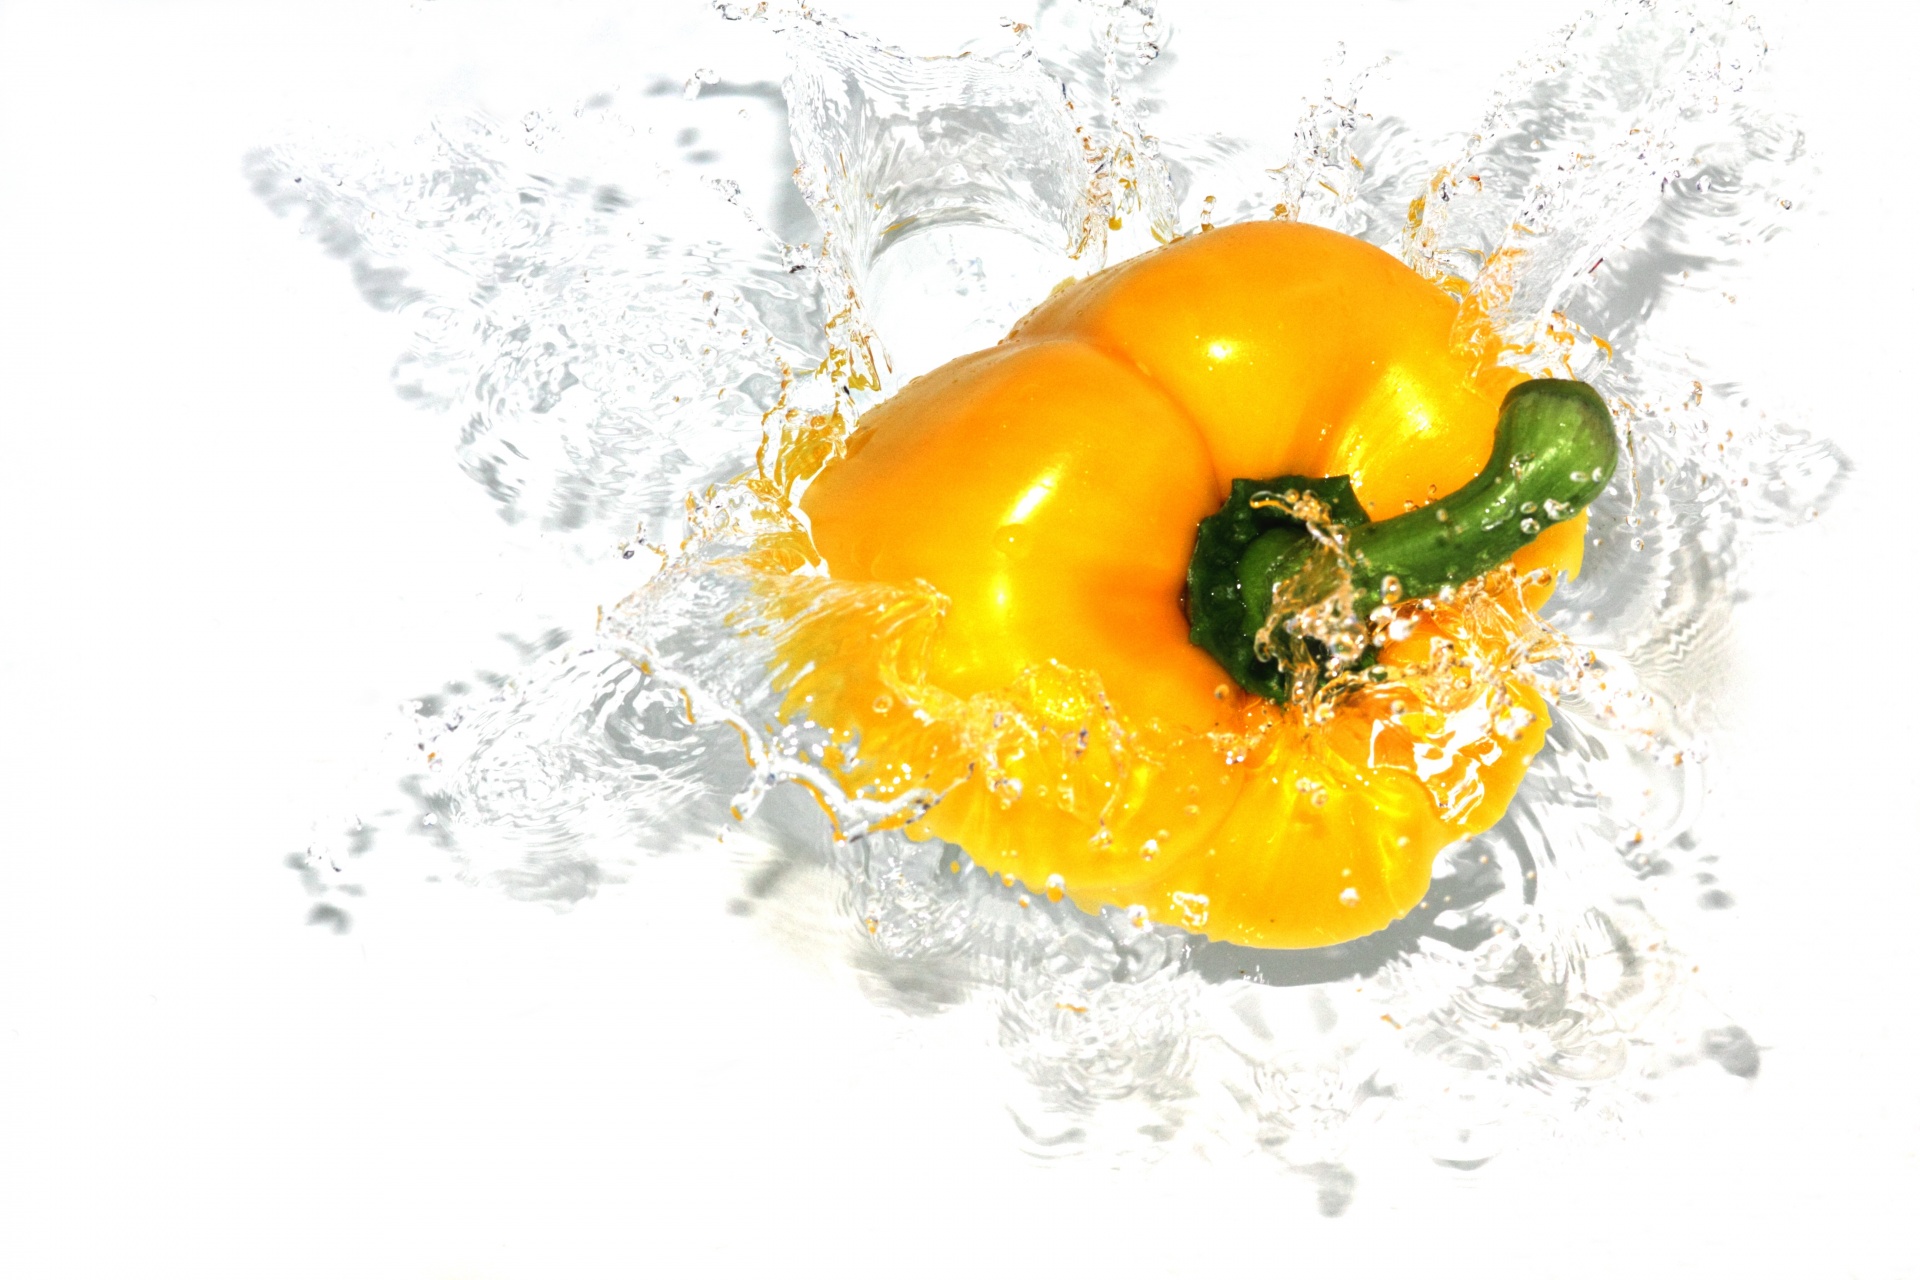 A yellow bell pepper, splashing into water.